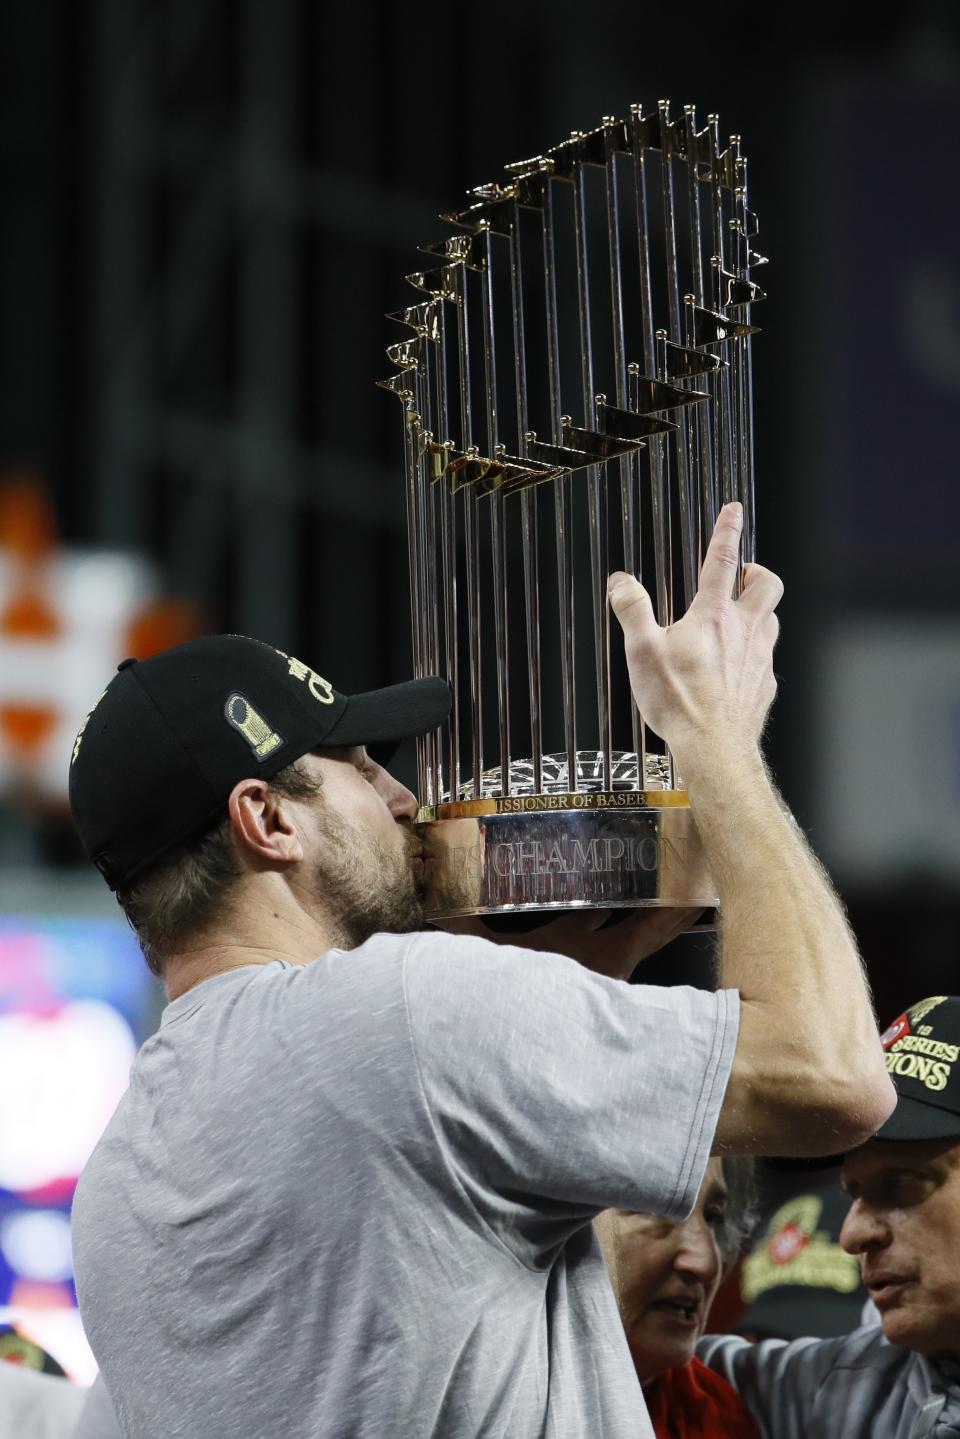 FILE - In this Oct. 30, 2019, file photo, Washington Nationals' Max Scherzer celebrates after Game 7 of the baseball World Series against the Houston Astros in Houston. The last time these teams played the Nationals were celebrating their World Series title in Houston. Since then the Astros have become the league's villains, with a sign-stealing scandal tarnishing their reputation and casting a shadow on their 2017 title. (AP Photo/Matt Slocum, File)